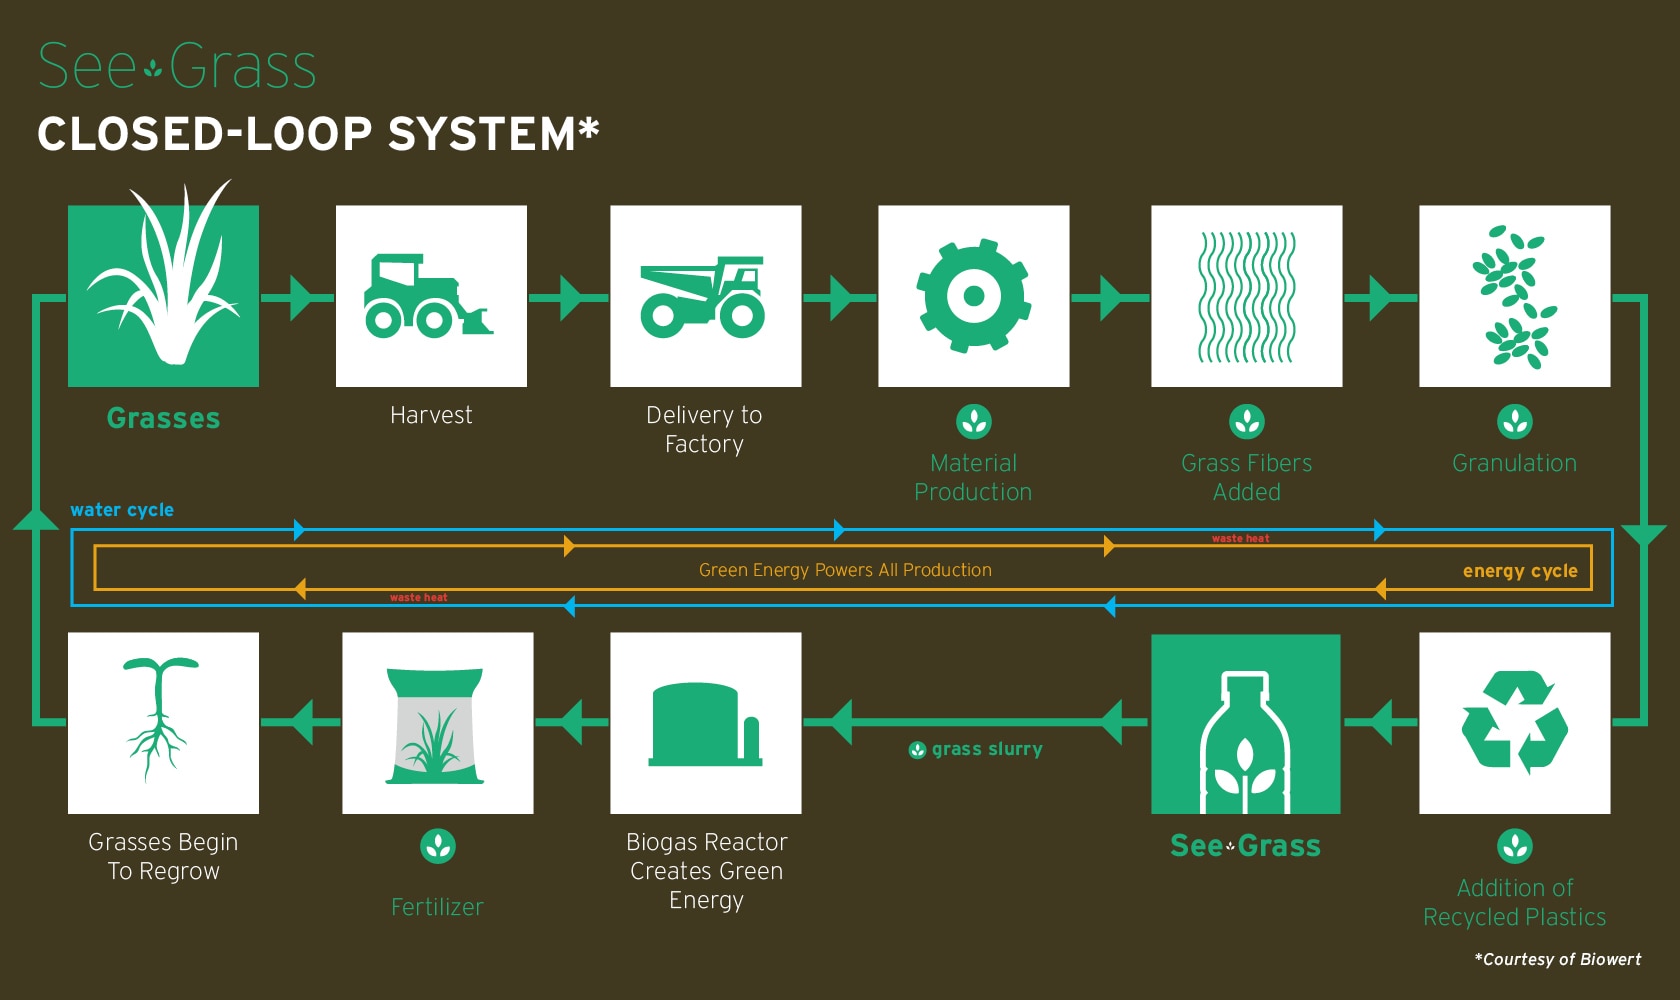 an infographic showing the closed-loop process of create Zeal See Grass sunglass frames